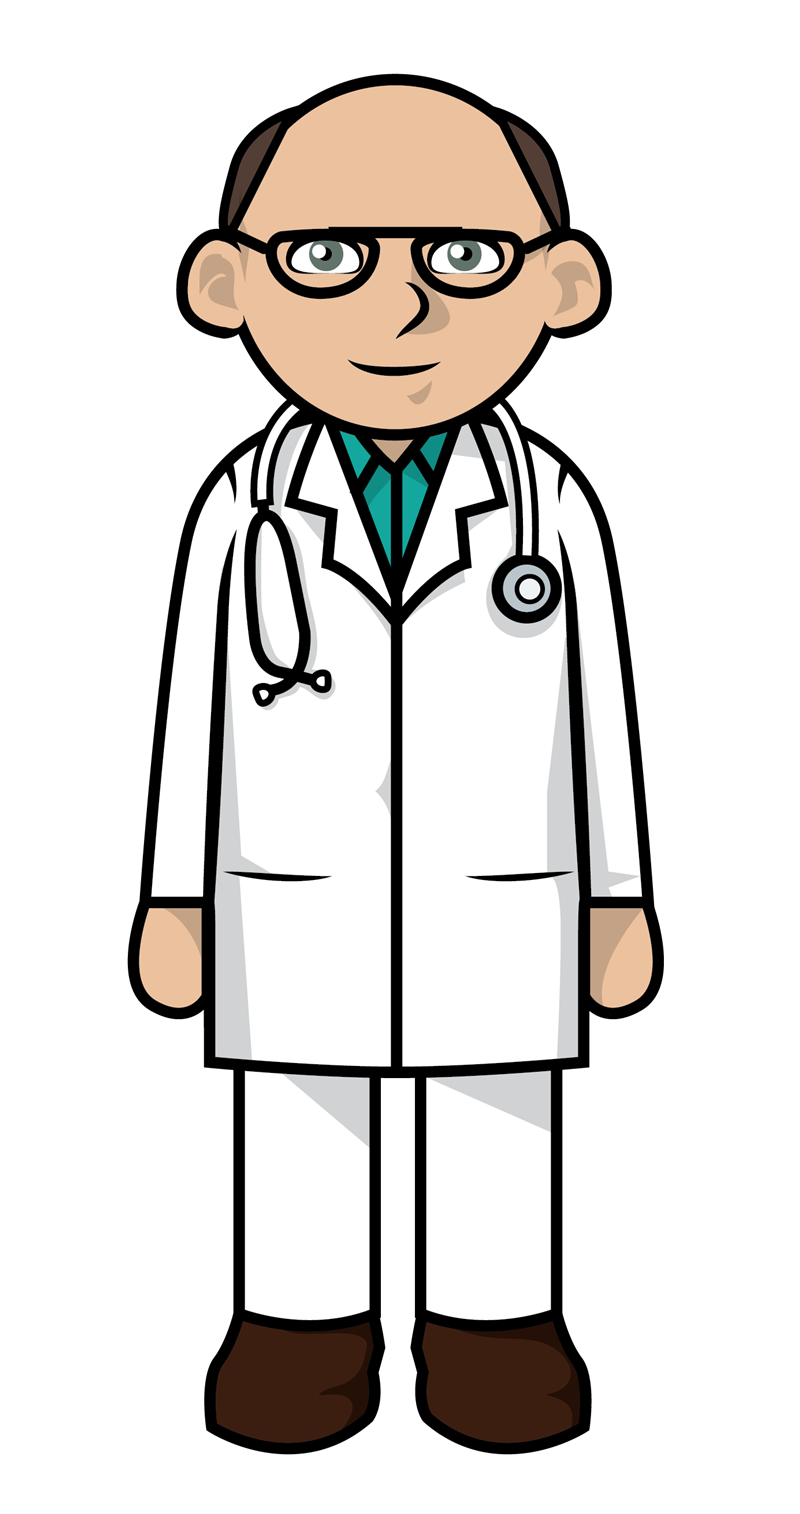 Free clipart images doctor